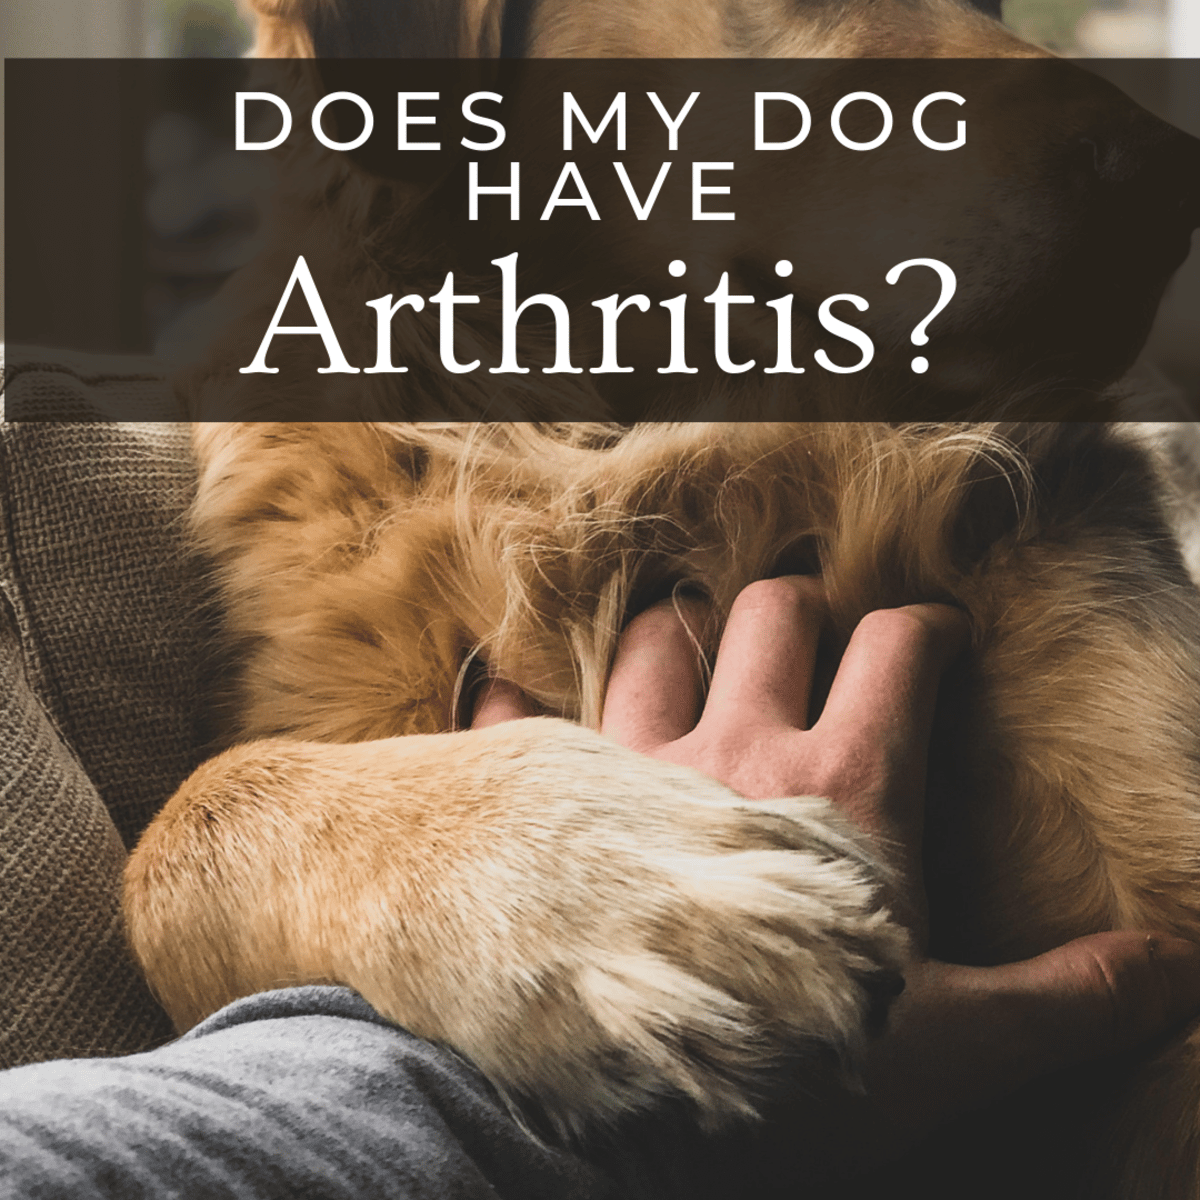 Signs of Arthritis in Dogs